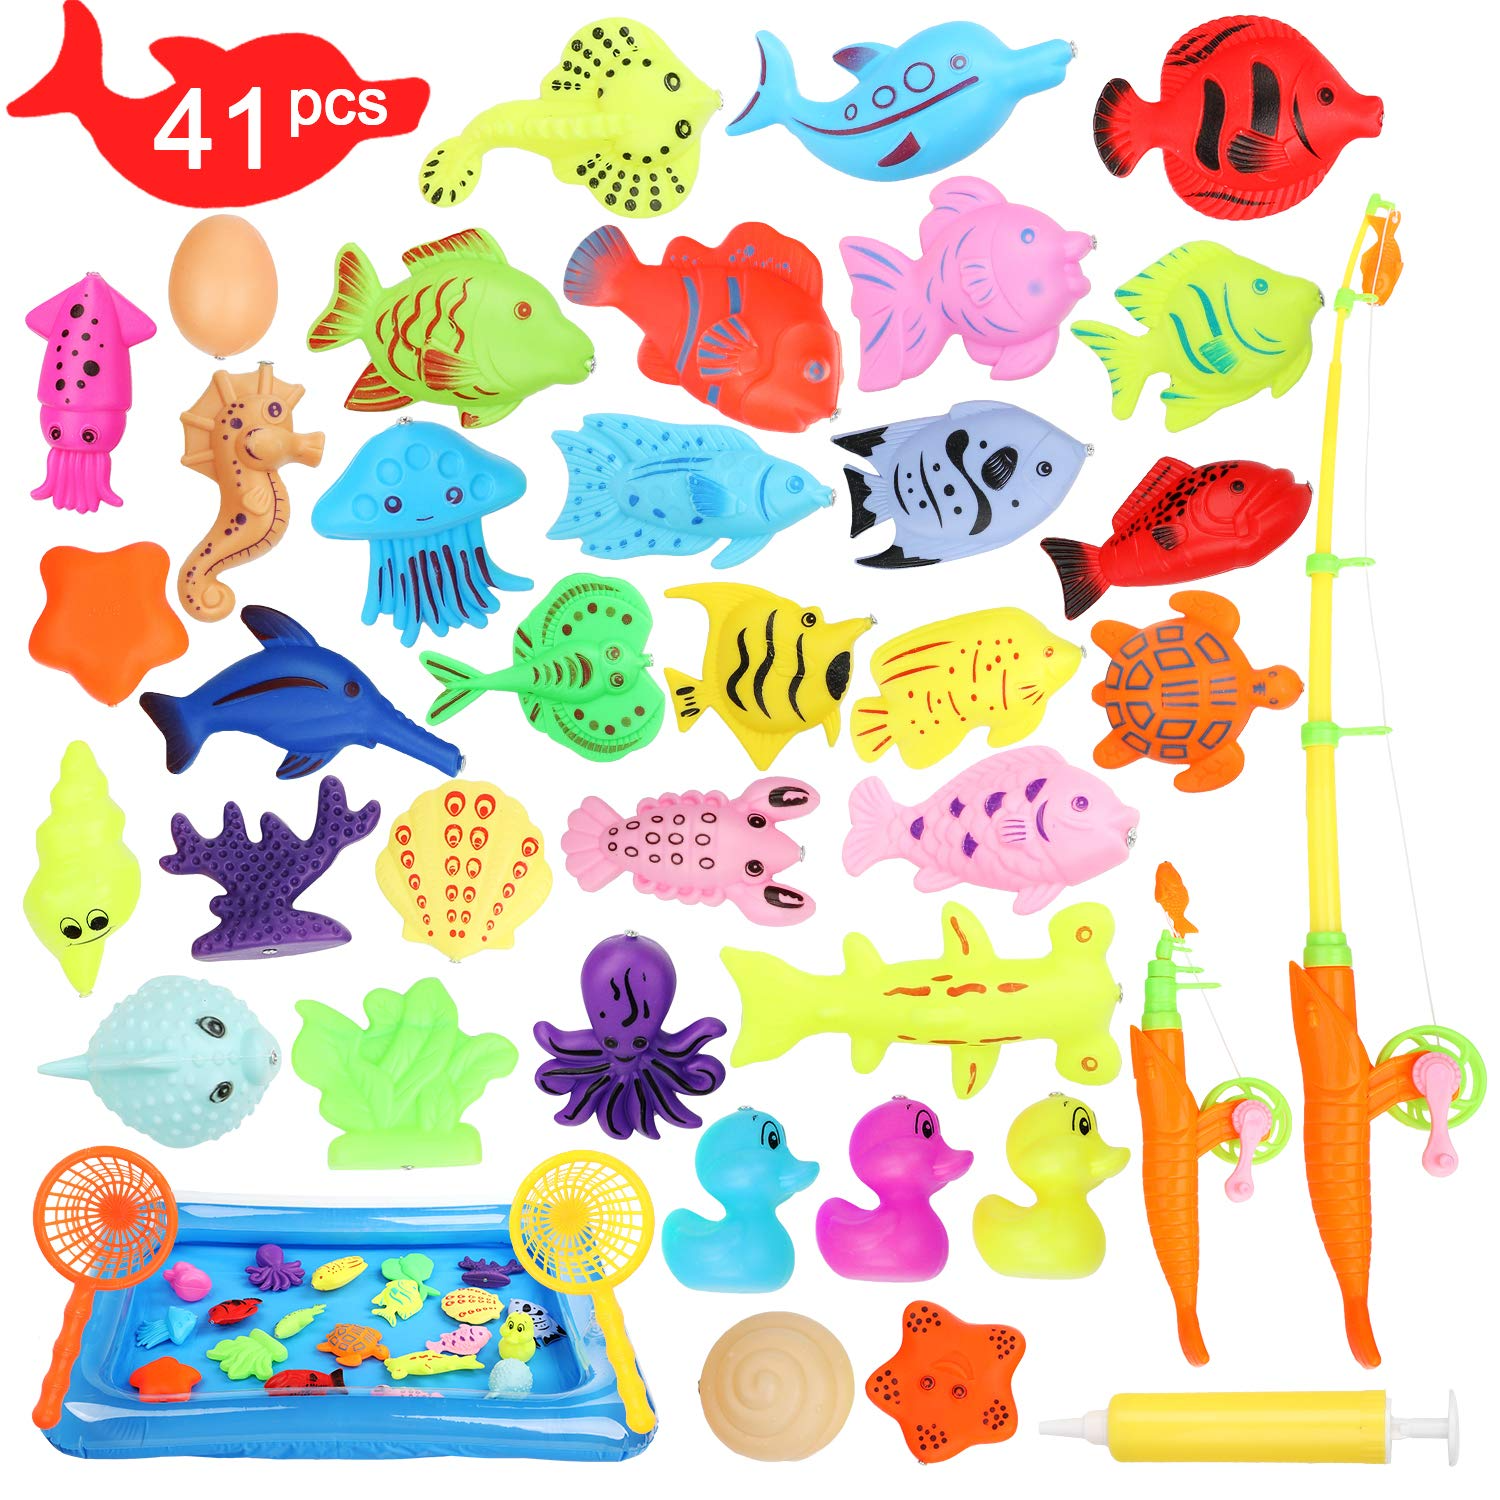 Ucradle Magnetic Fishing Toy, 41 PCS Waterproof Magnet Fishing Game  Educational Bath Toy Play Set, Great Gift For Toddlers Kids with Fishes, 2  Pole